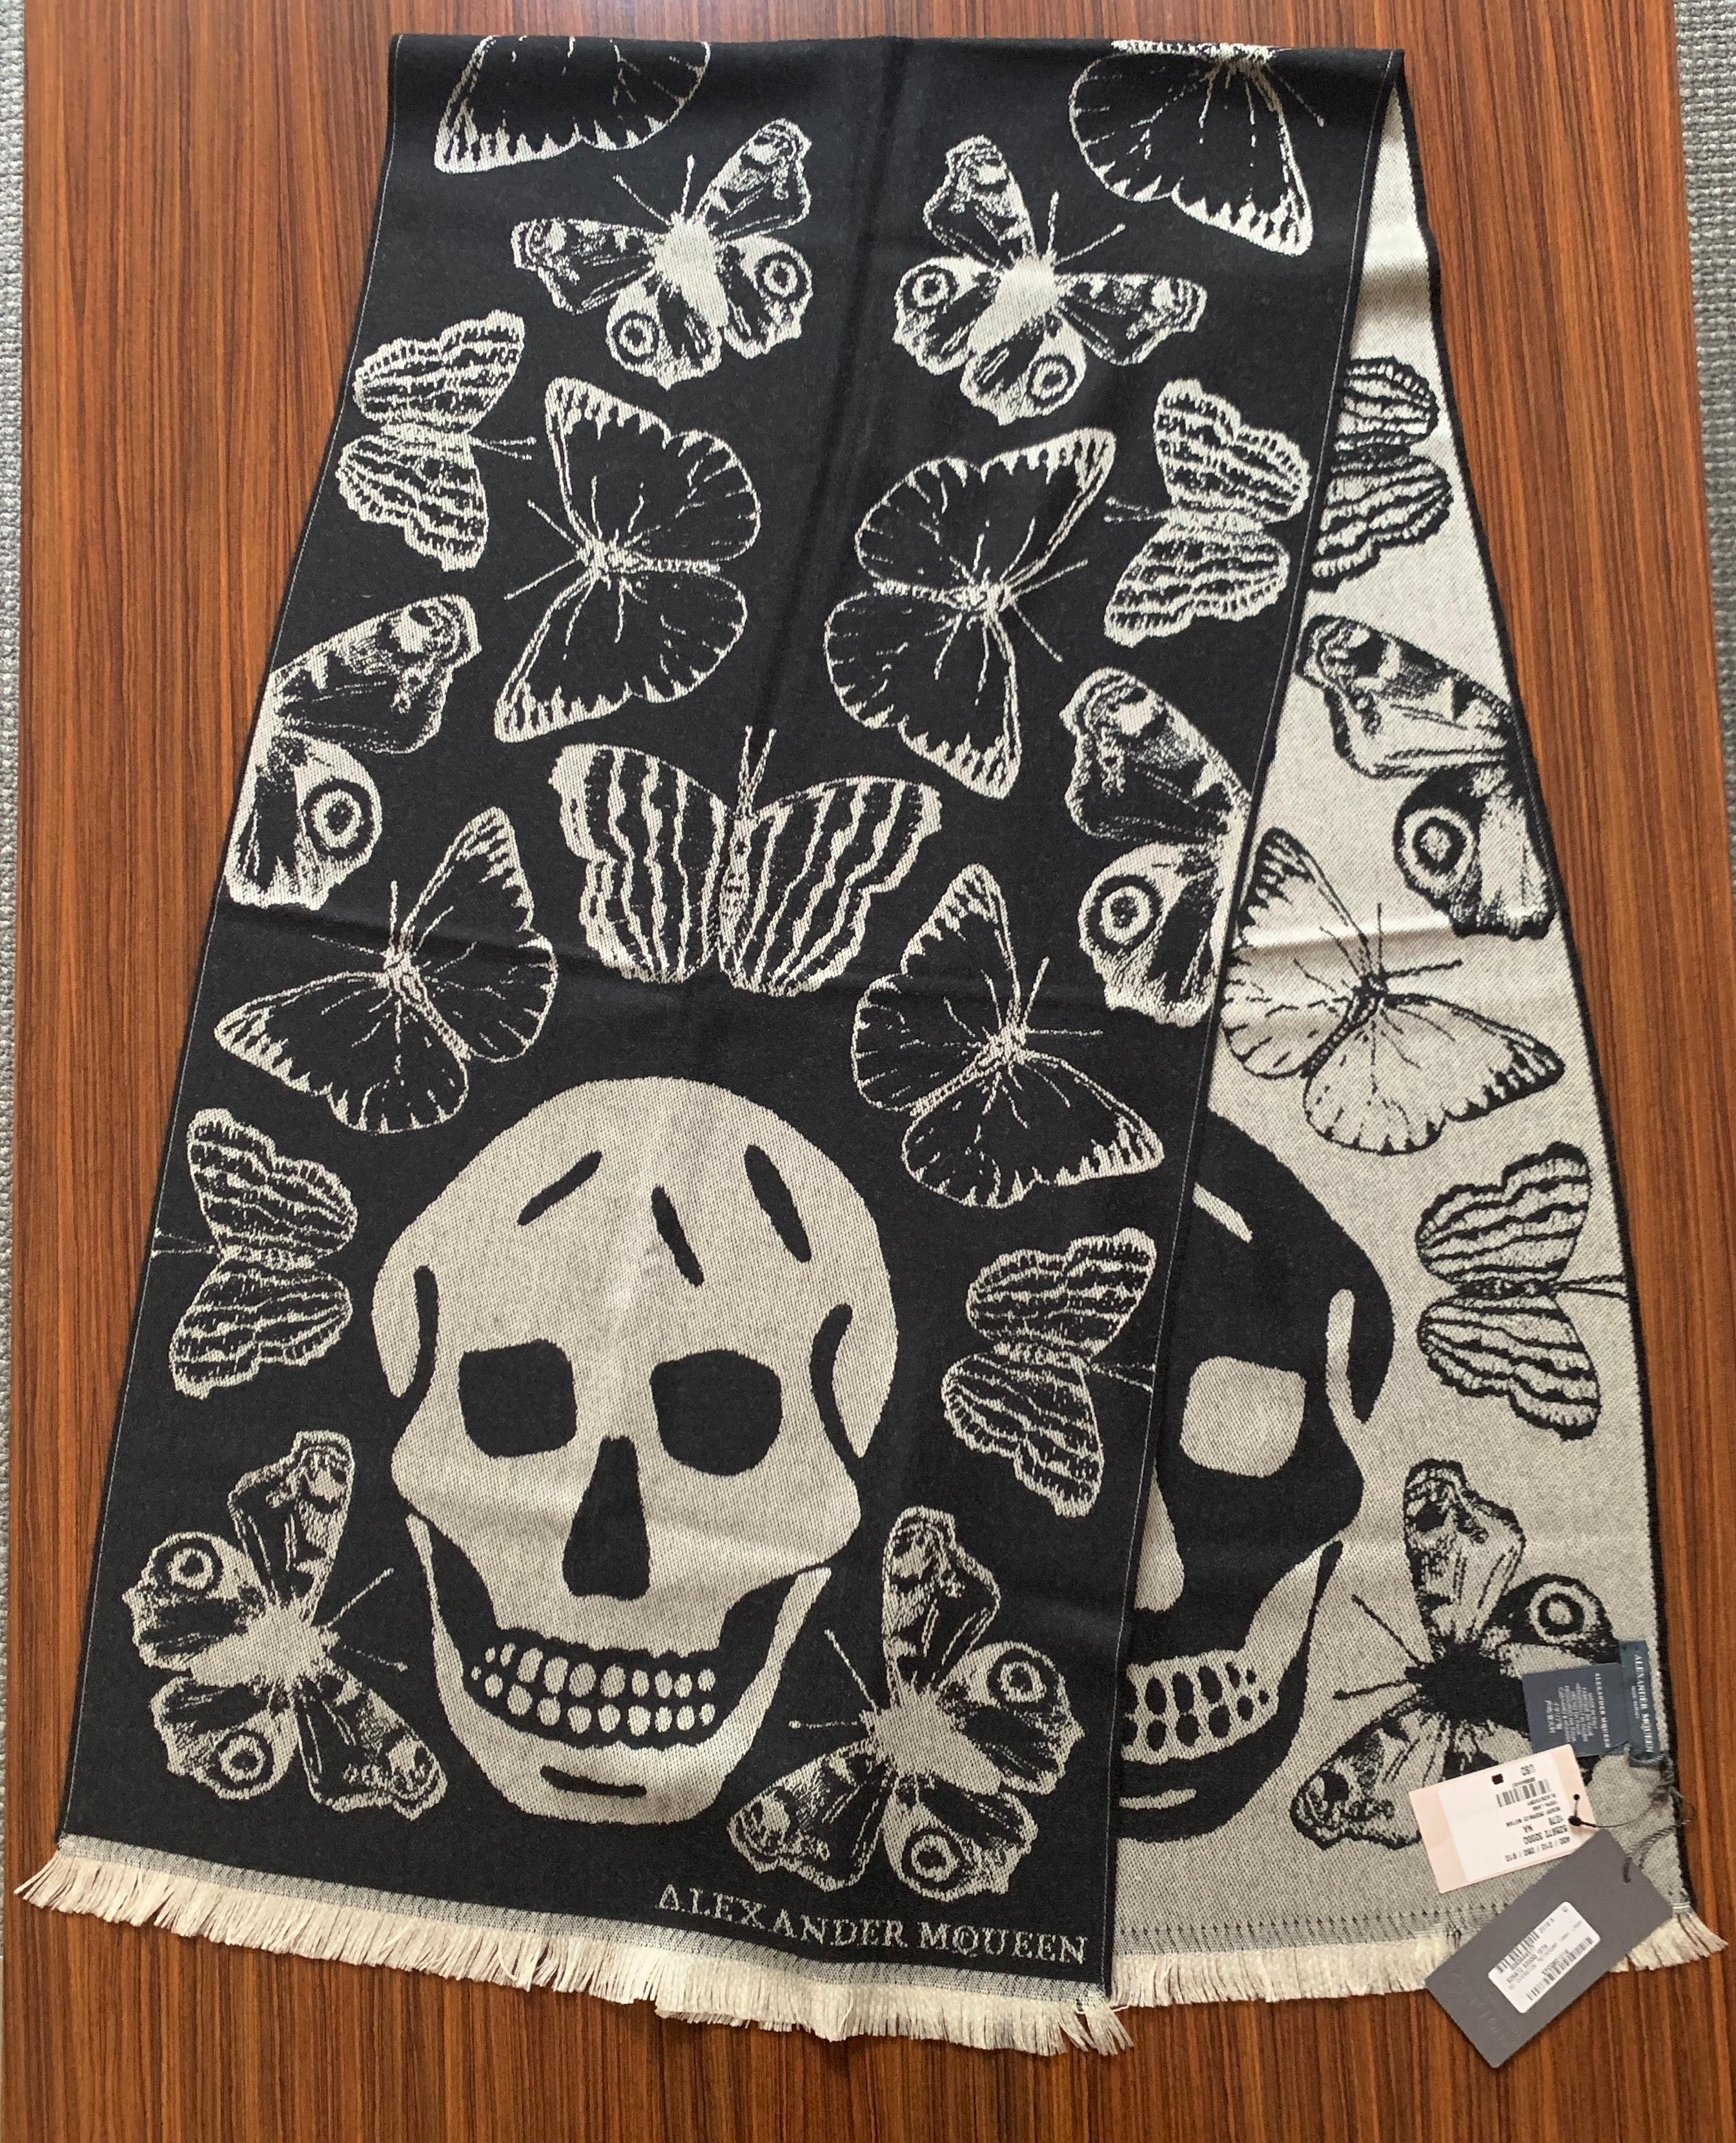 New Alexander McQueen large black scarf featuring butterflies or moths throughout and a large skull at each end. Super soft wool. Light fringe at ends. Signed Alexander McQueen at one bottom corner.

Purchased directly from McQueen store.

100%